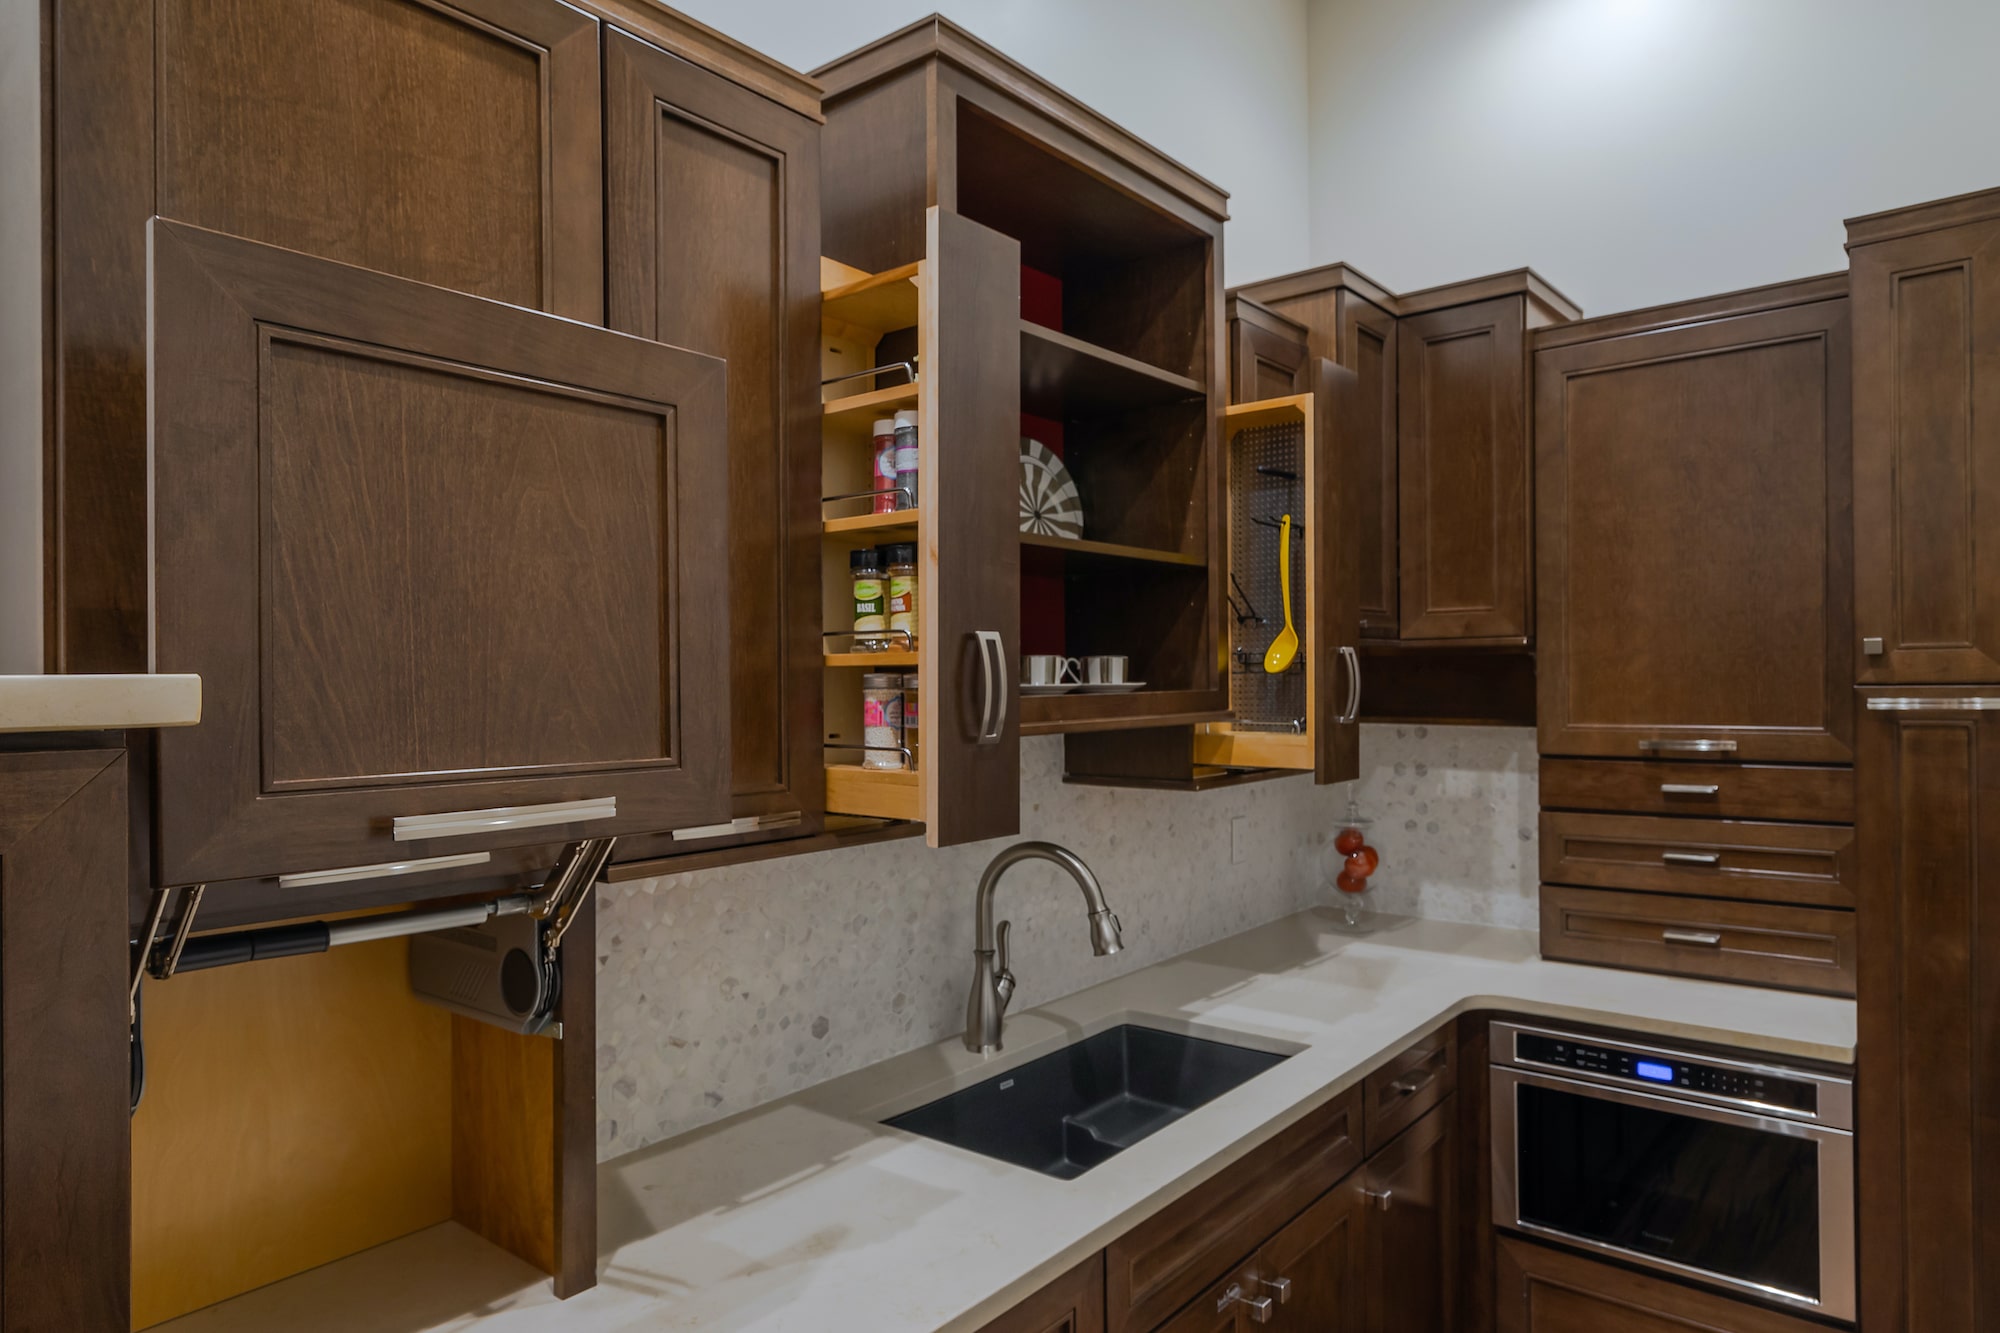 image of a showroom kitchen area with a sink and cabinets